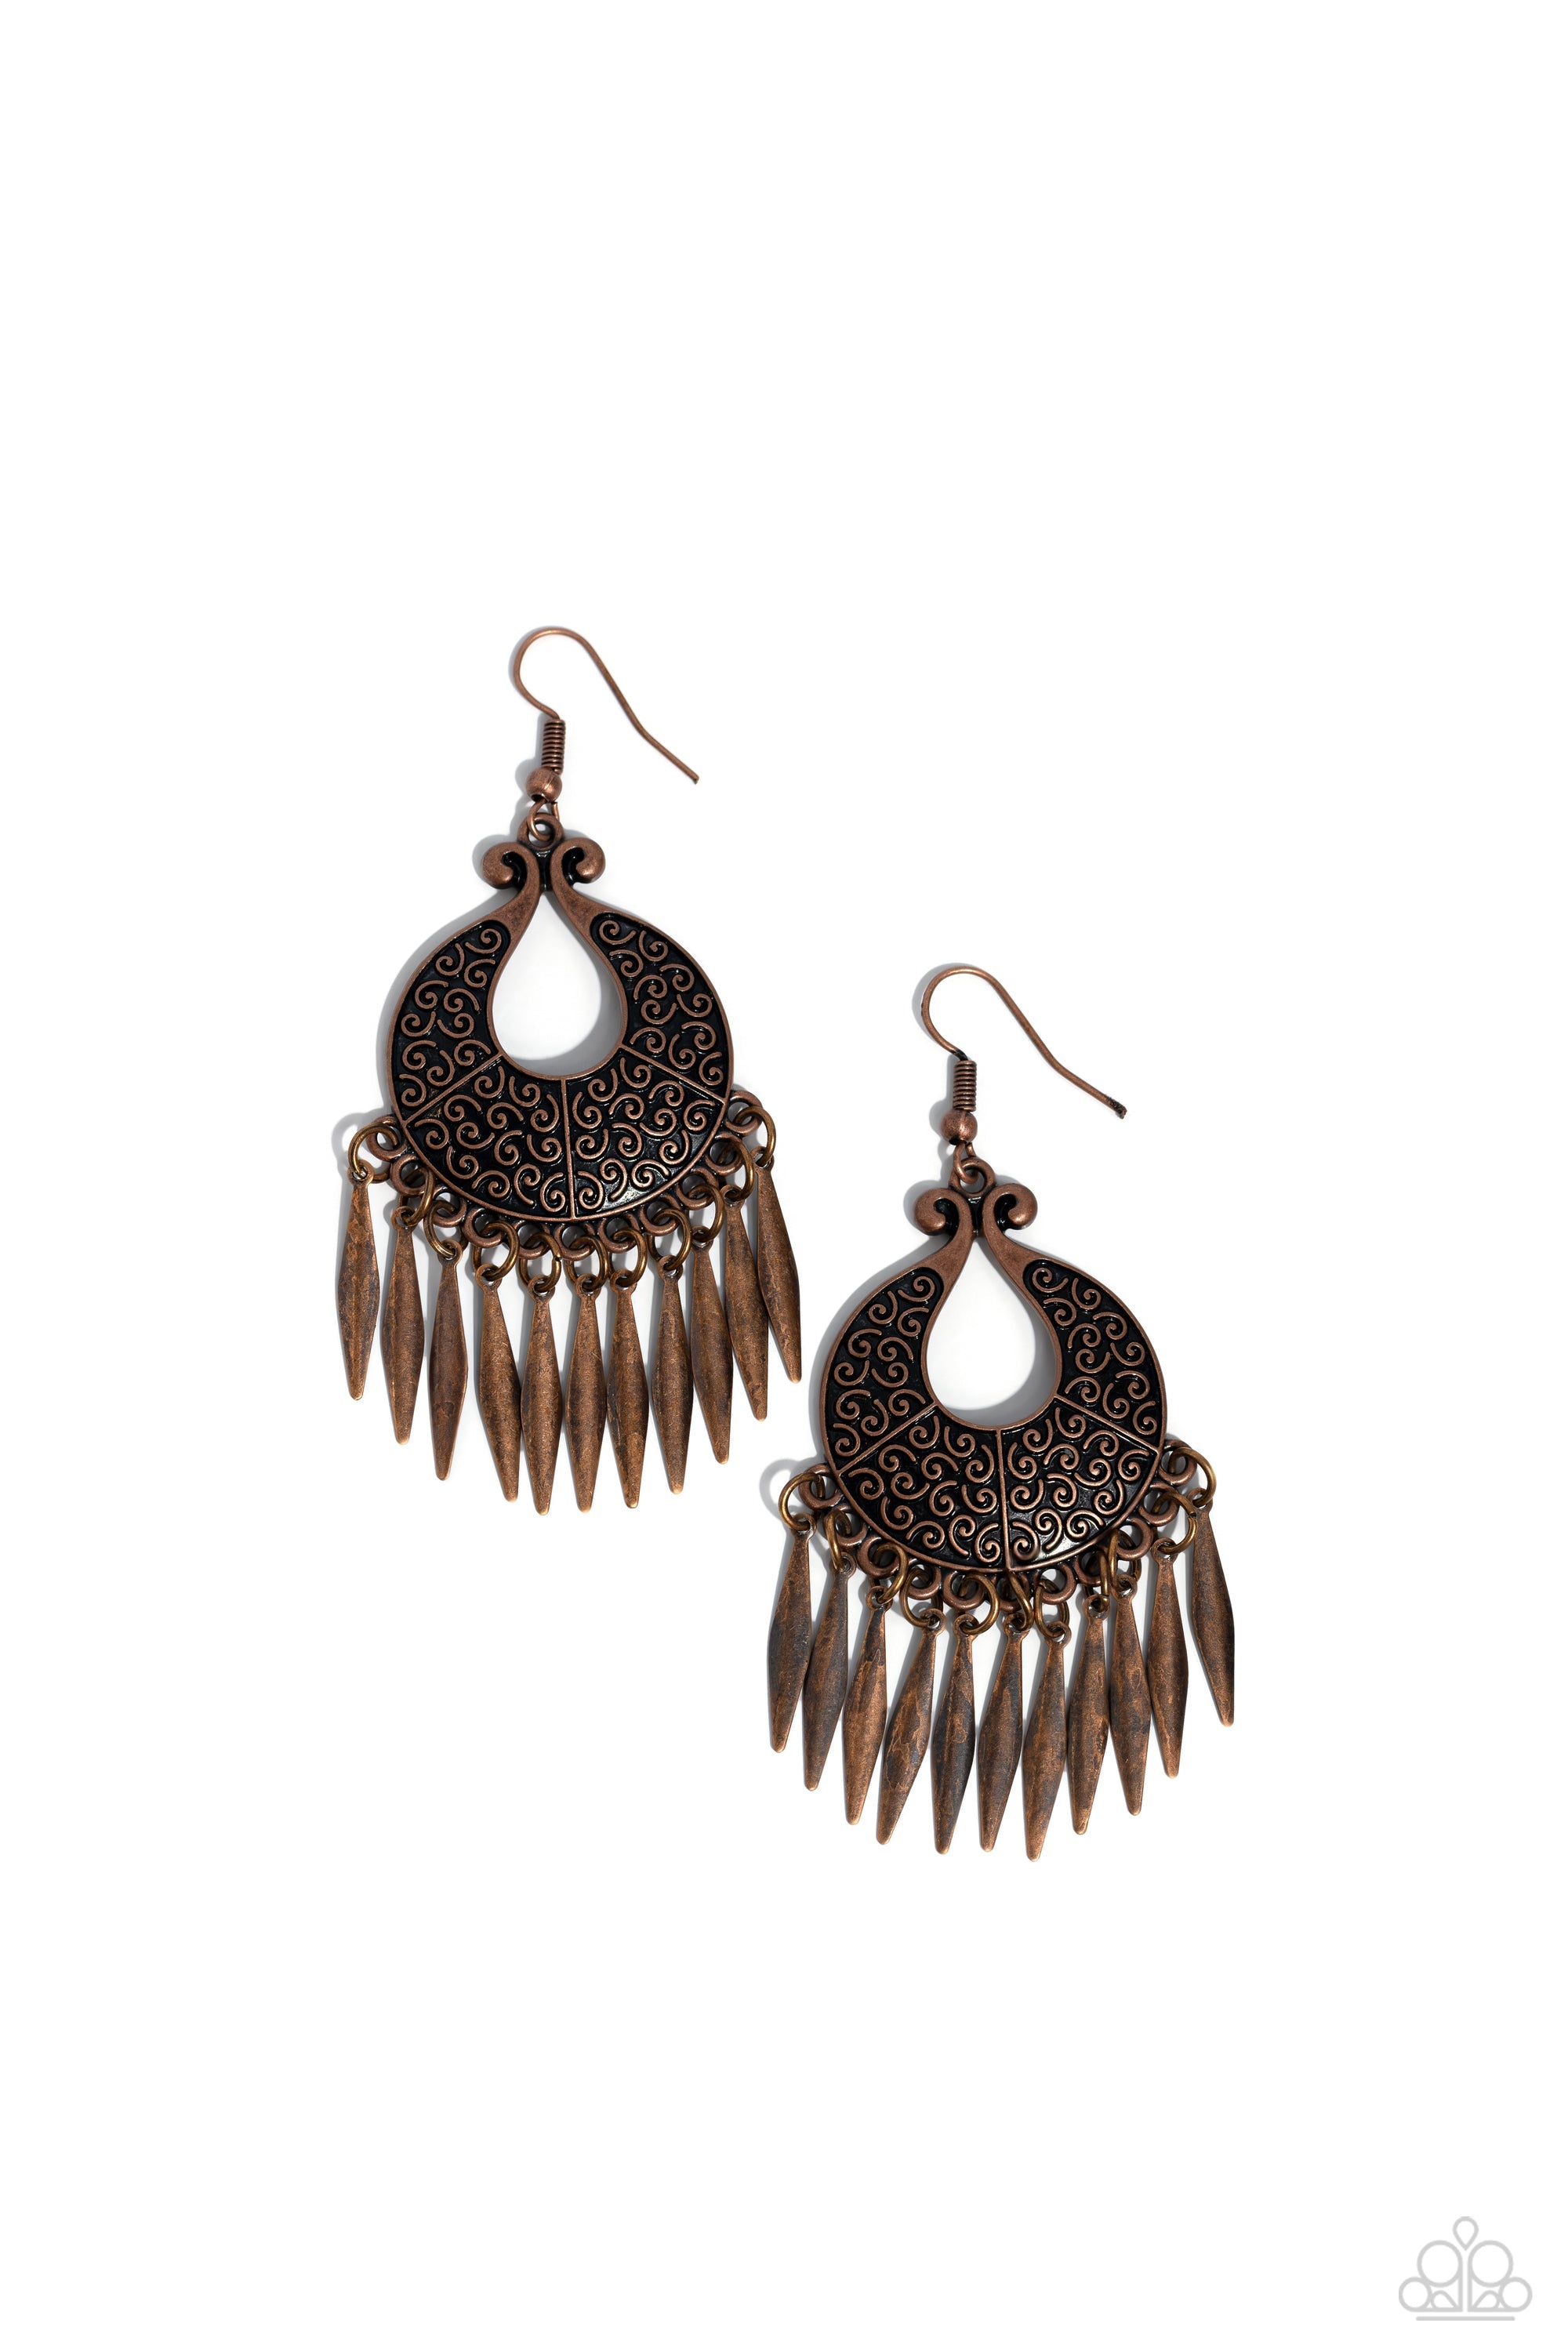 Tribal Charm Copper Earrings - Paparazzi Accessories- lightbox - CarasShop.com - $5 Jewelry by Cara Jewels